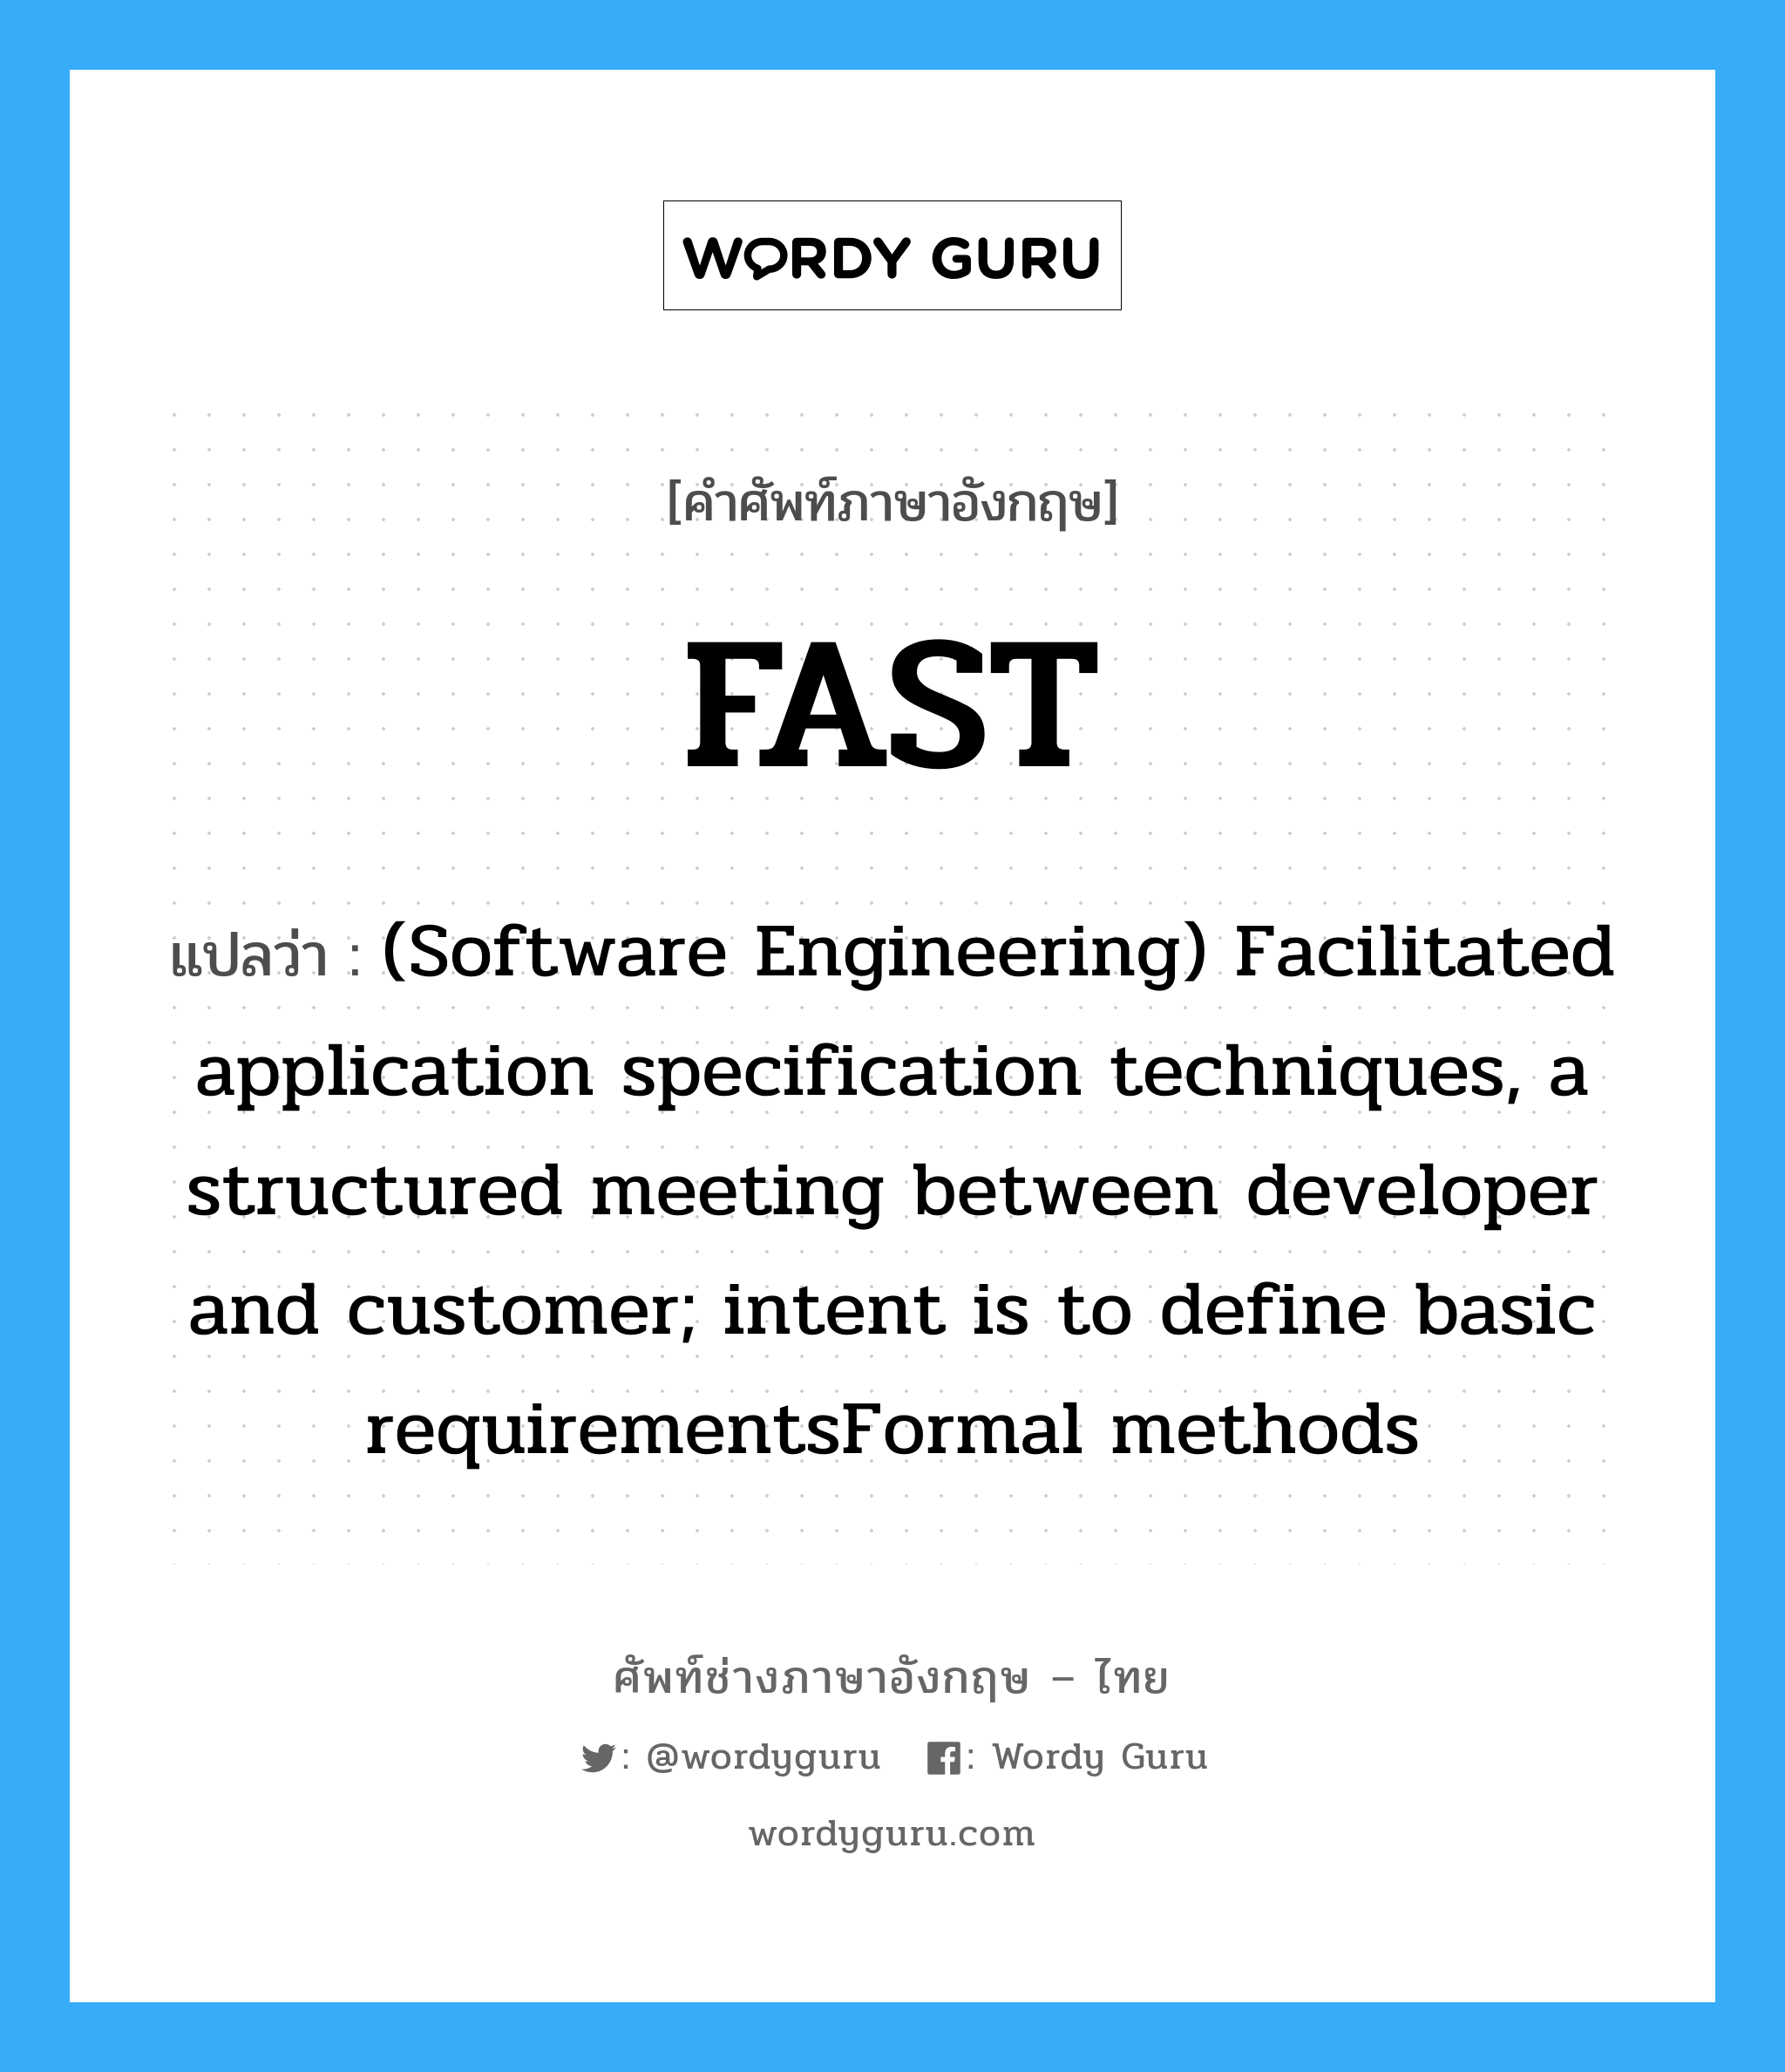 FAST แปลว่า?, คำศัพท์ช่างภาษาอังกฤษ - ไทย FAST คำศัพท์ภาษาอังกฤษ FAST แปลว่า (Software Engineering) Facilitated application specification techniques, a structured meeting between developer and customer; intent is to define basic requirementsFormal methods